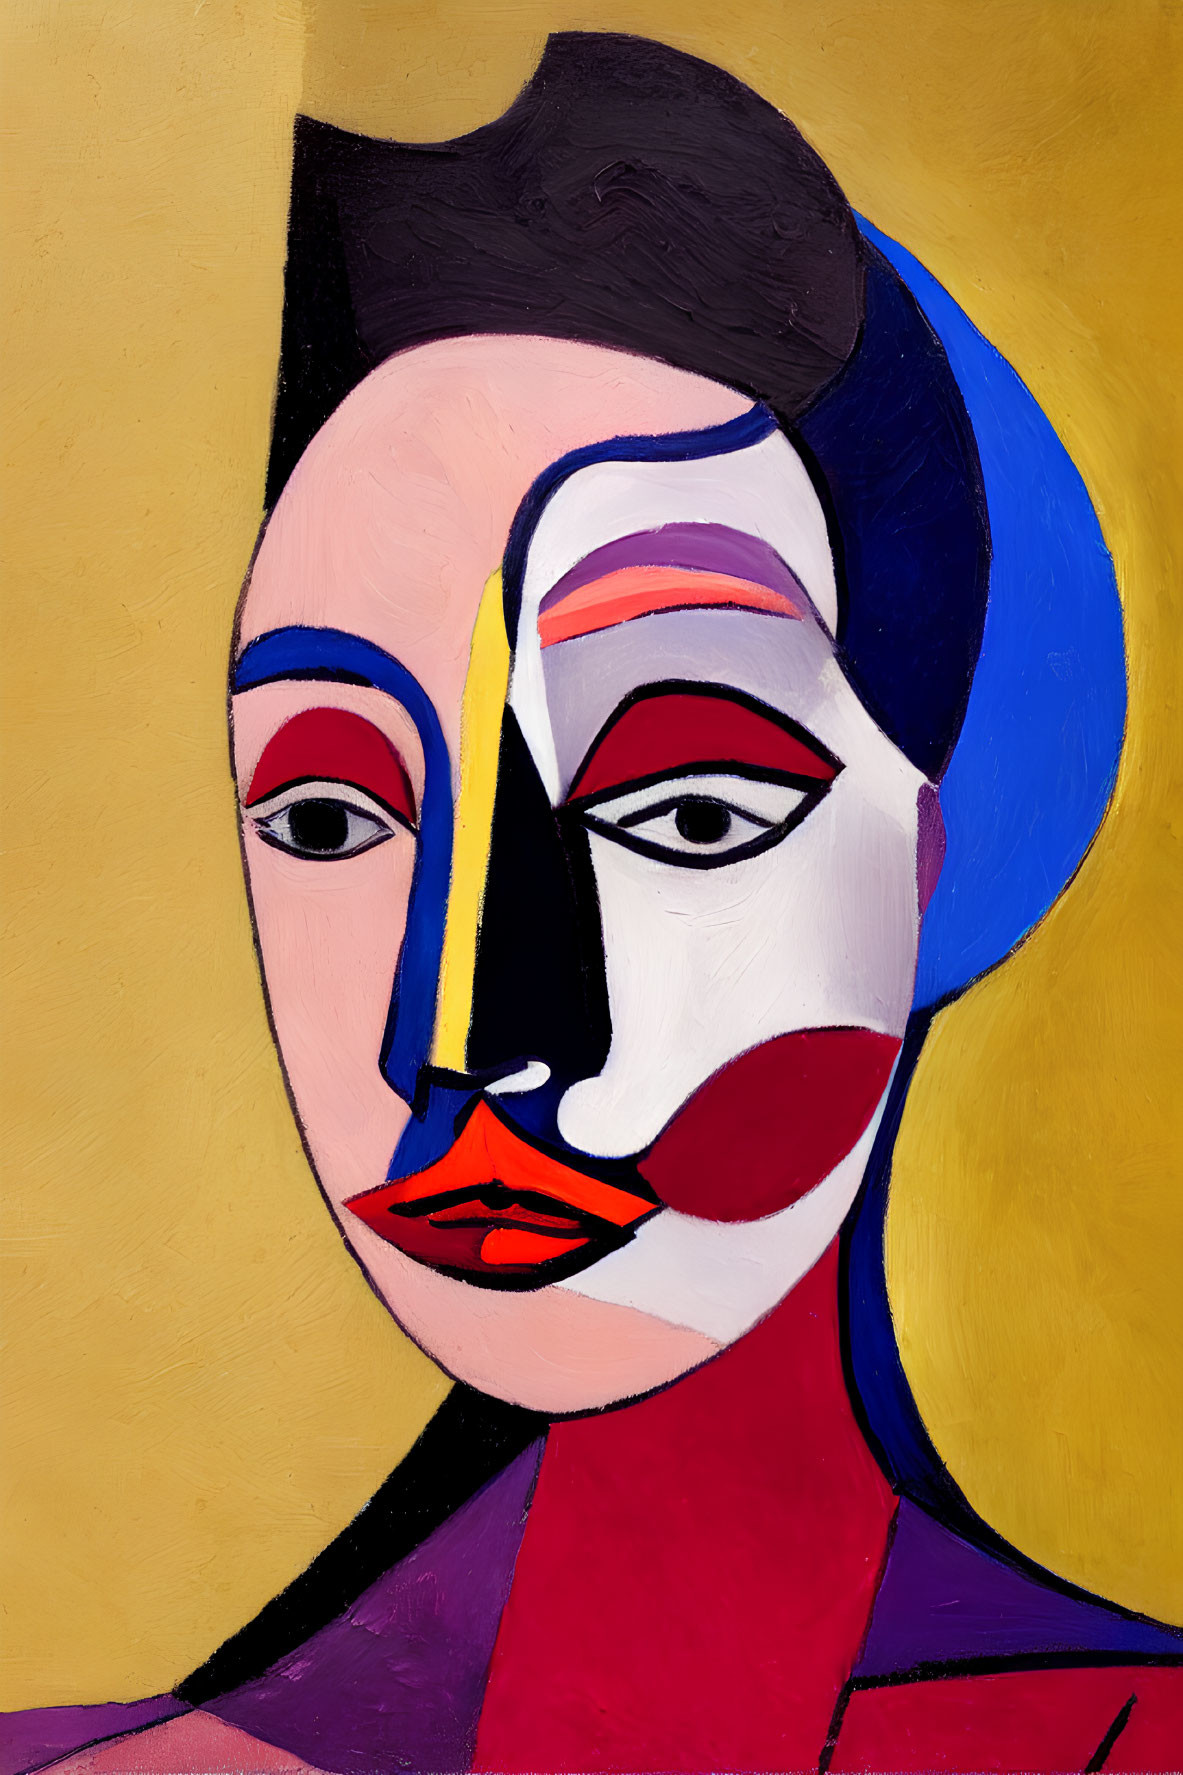 Multicolored Cubist portrait with black hairstyle on yellow background